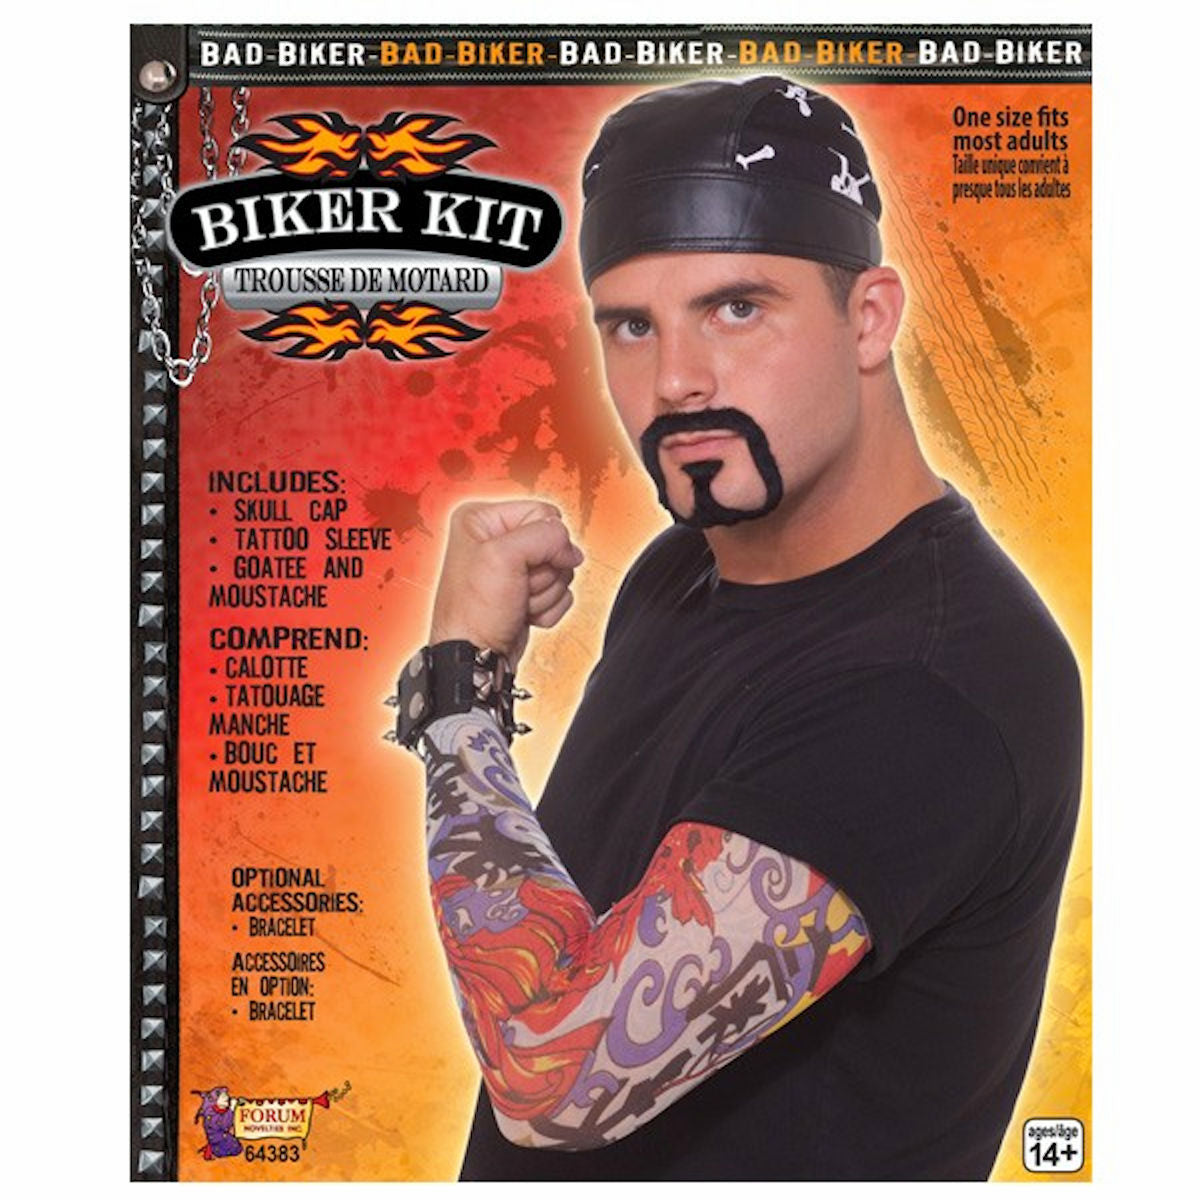 Bad Biker Costume Kit with Skull Cap, Tattoo Sleeve and Goatee Instant costume